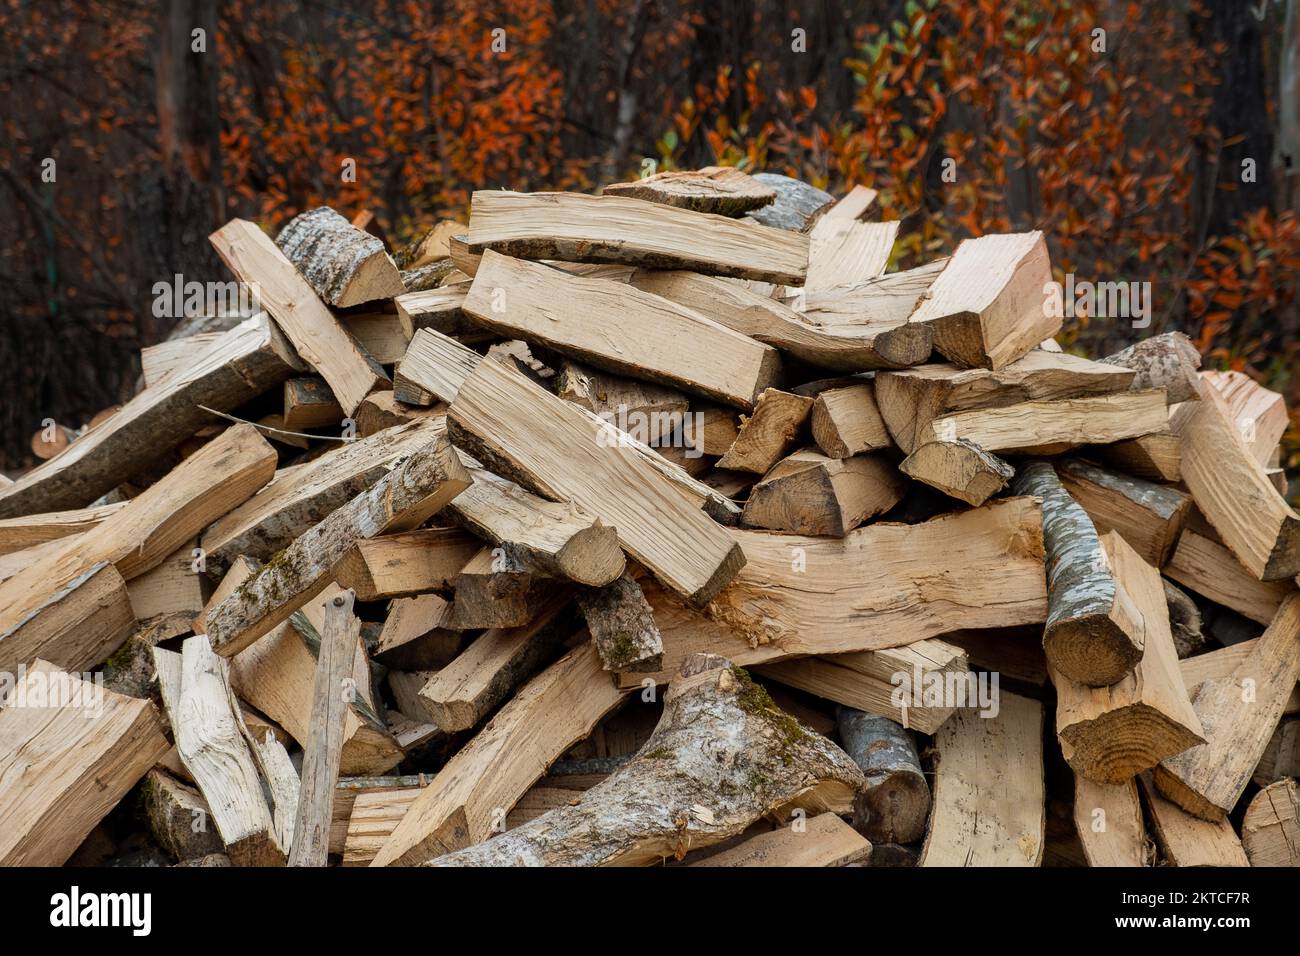 Chopped firewood for heating lies in a pile among the trees Stock Photo